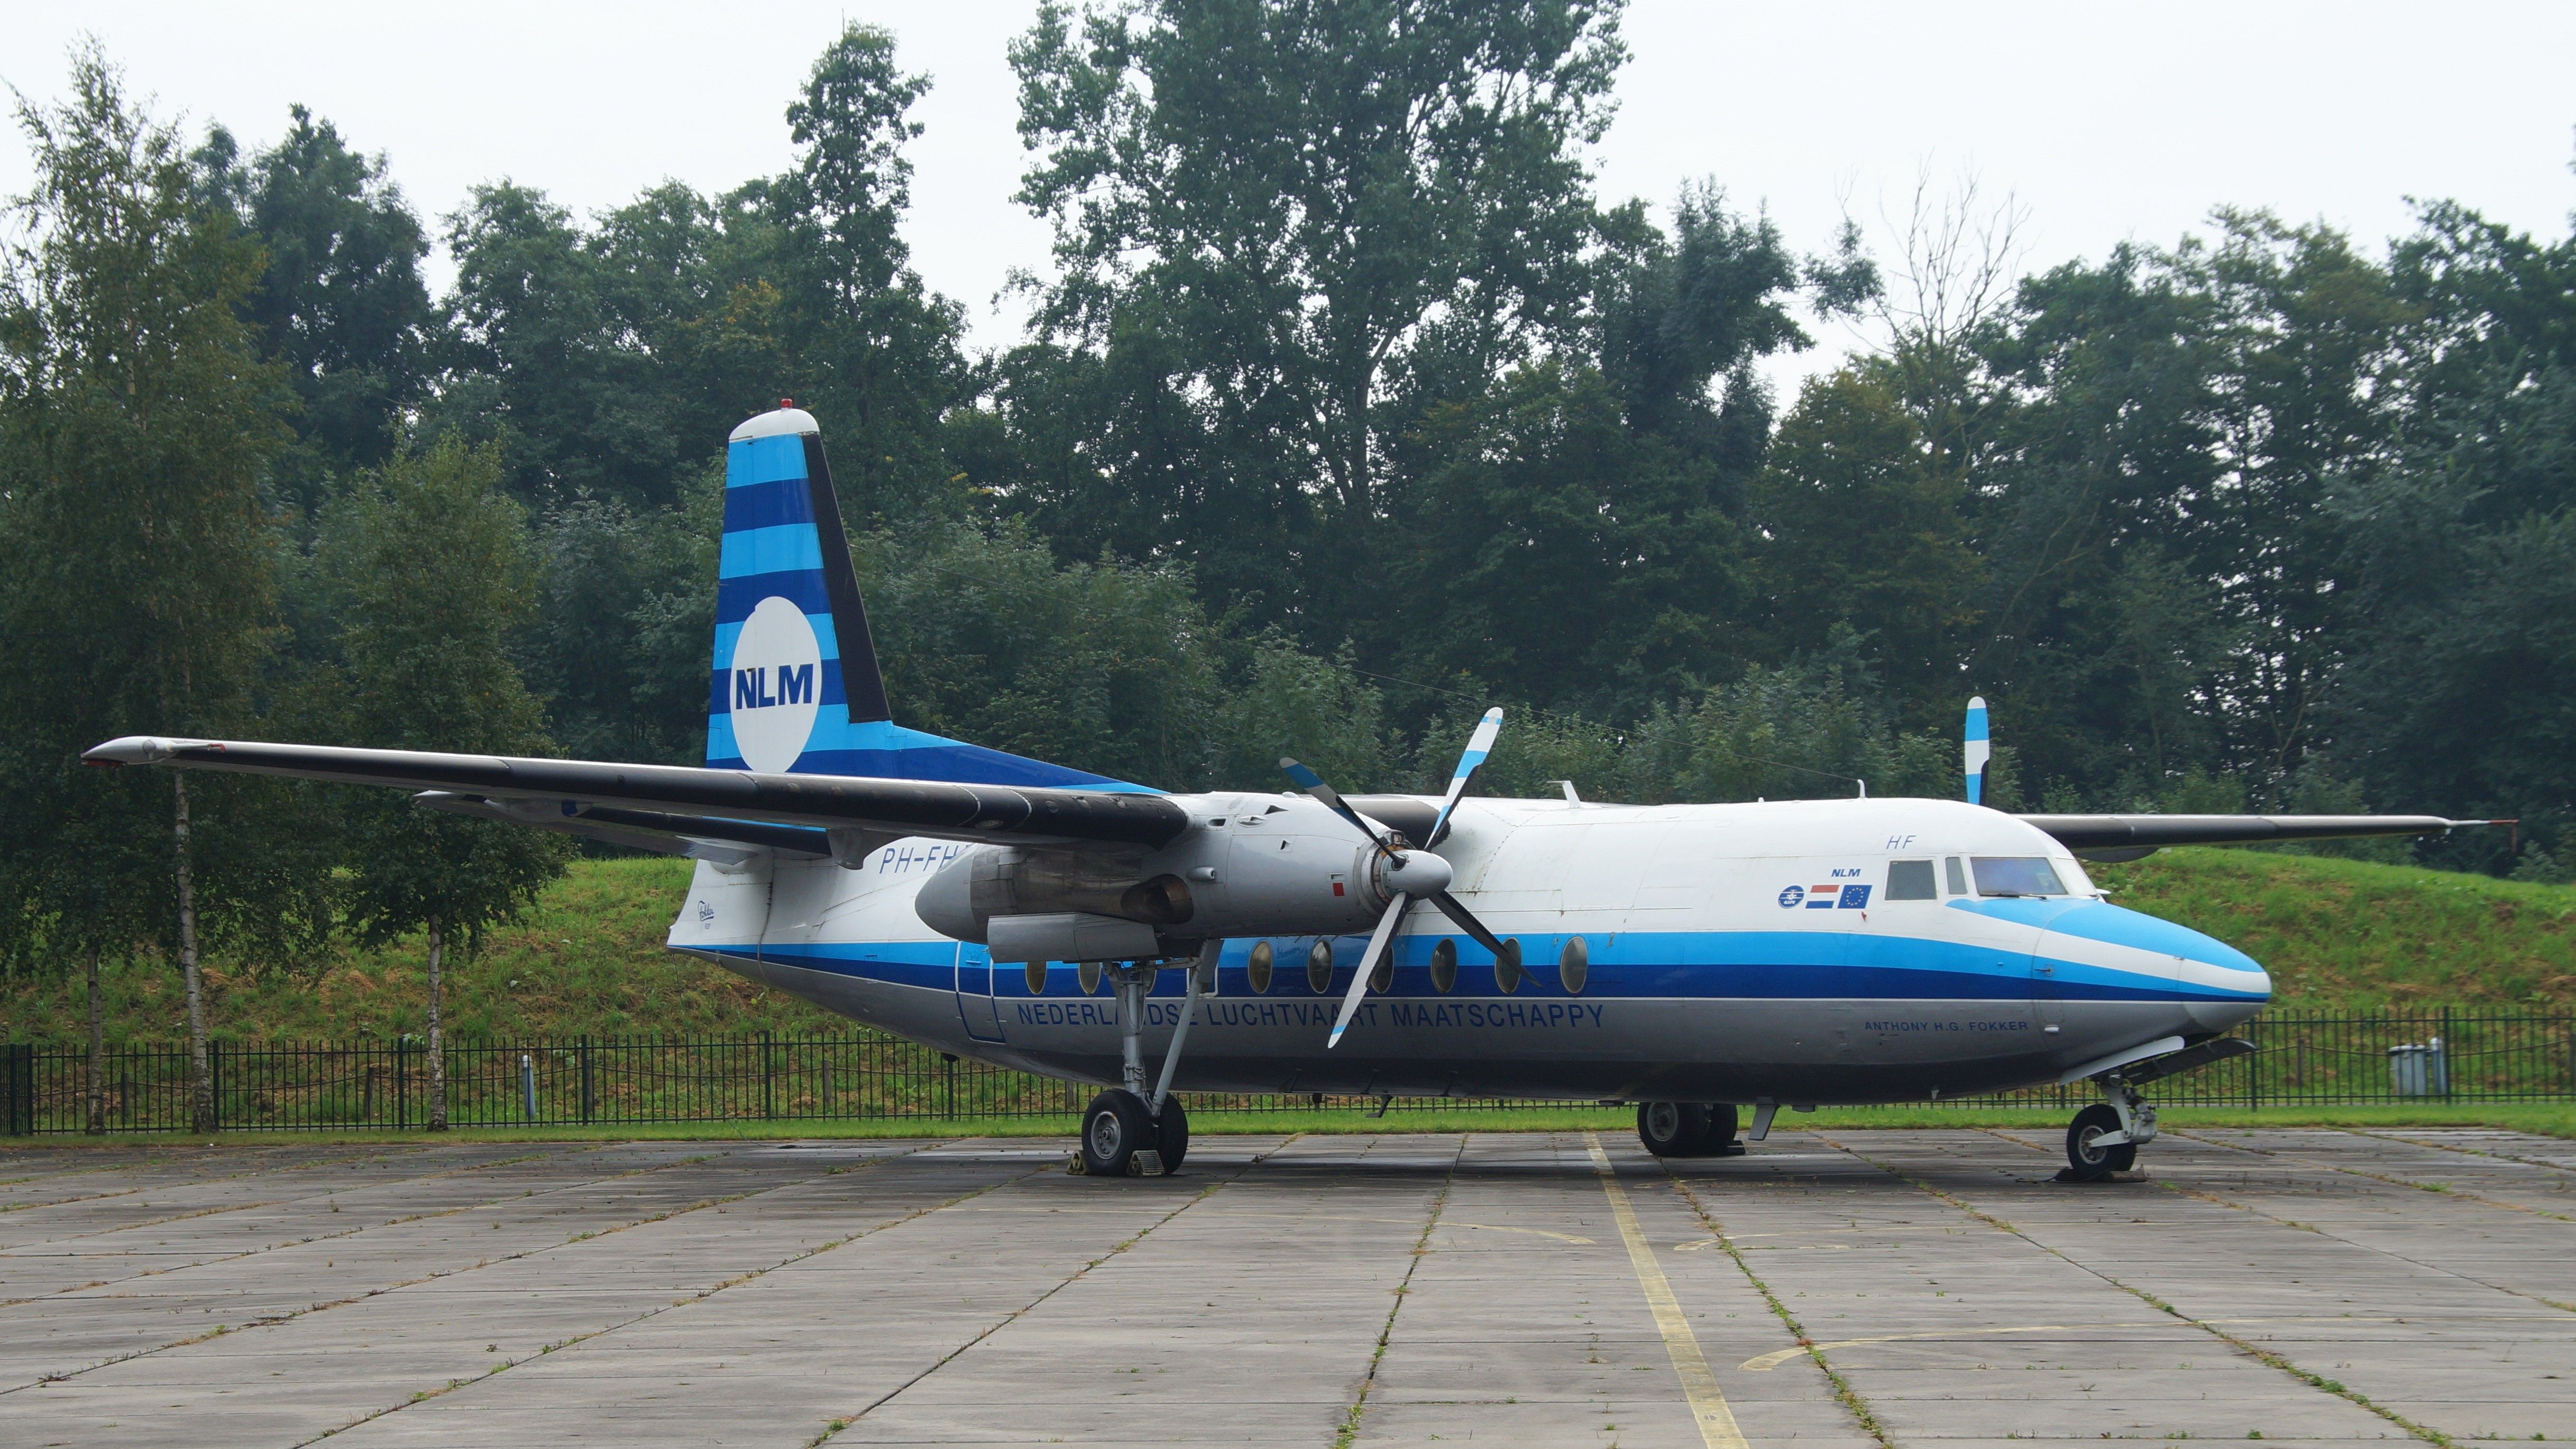 An NLM Fokker F27 Parked at an airport.